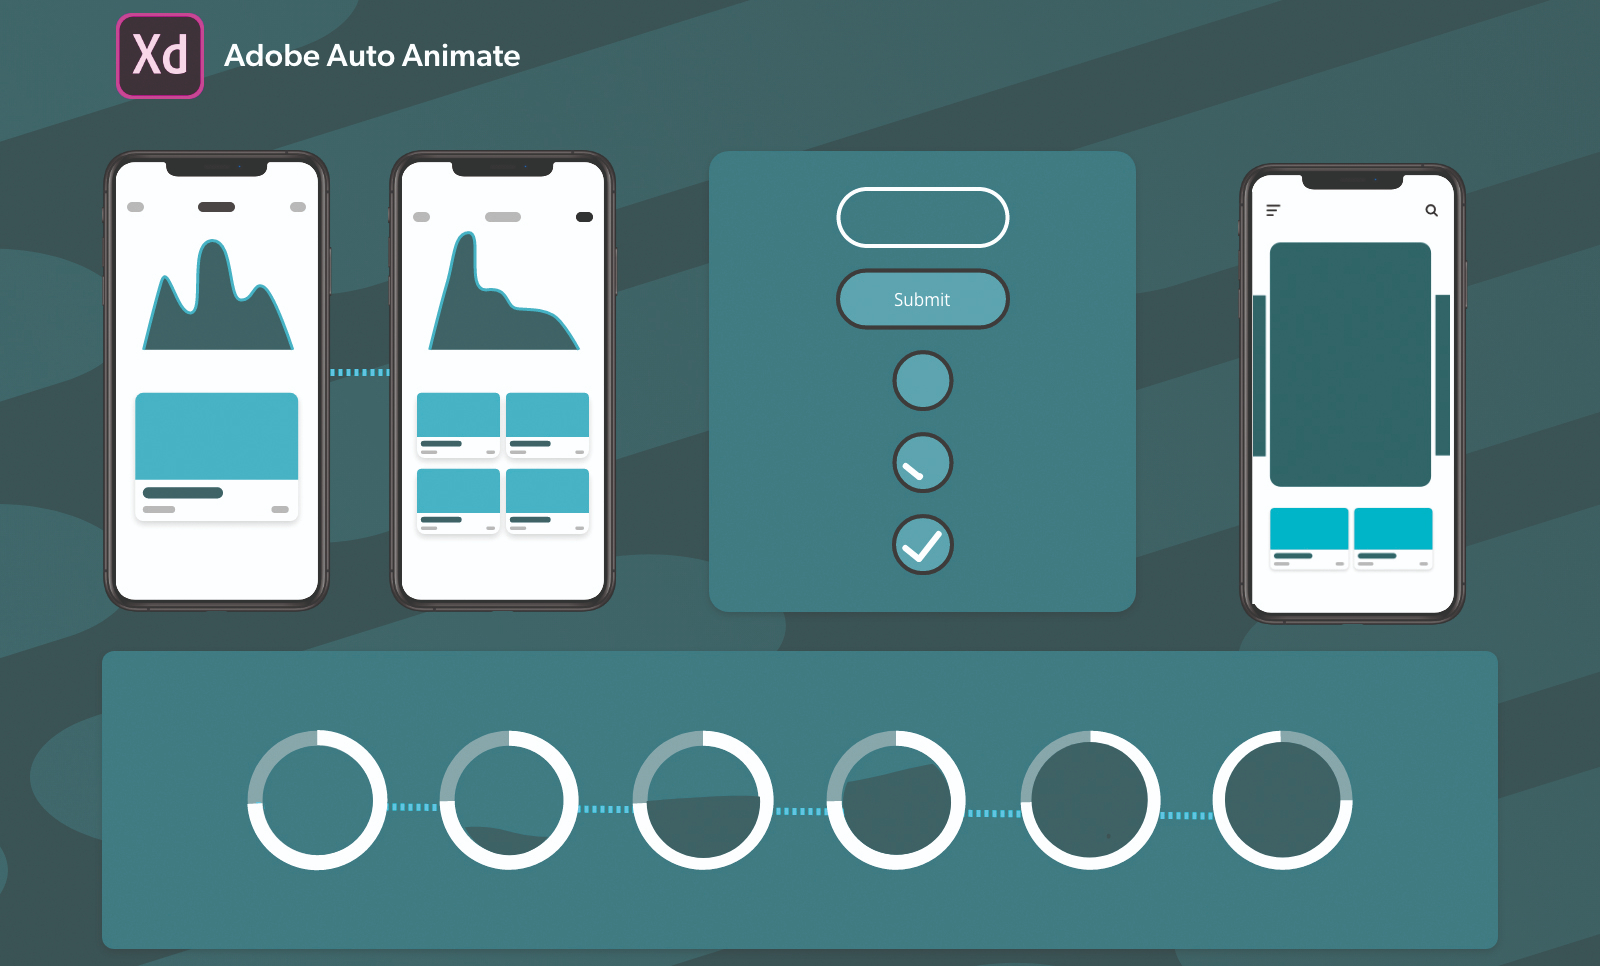 Adobe XD: How to use the Auto-Animate feature | Creative Bloq